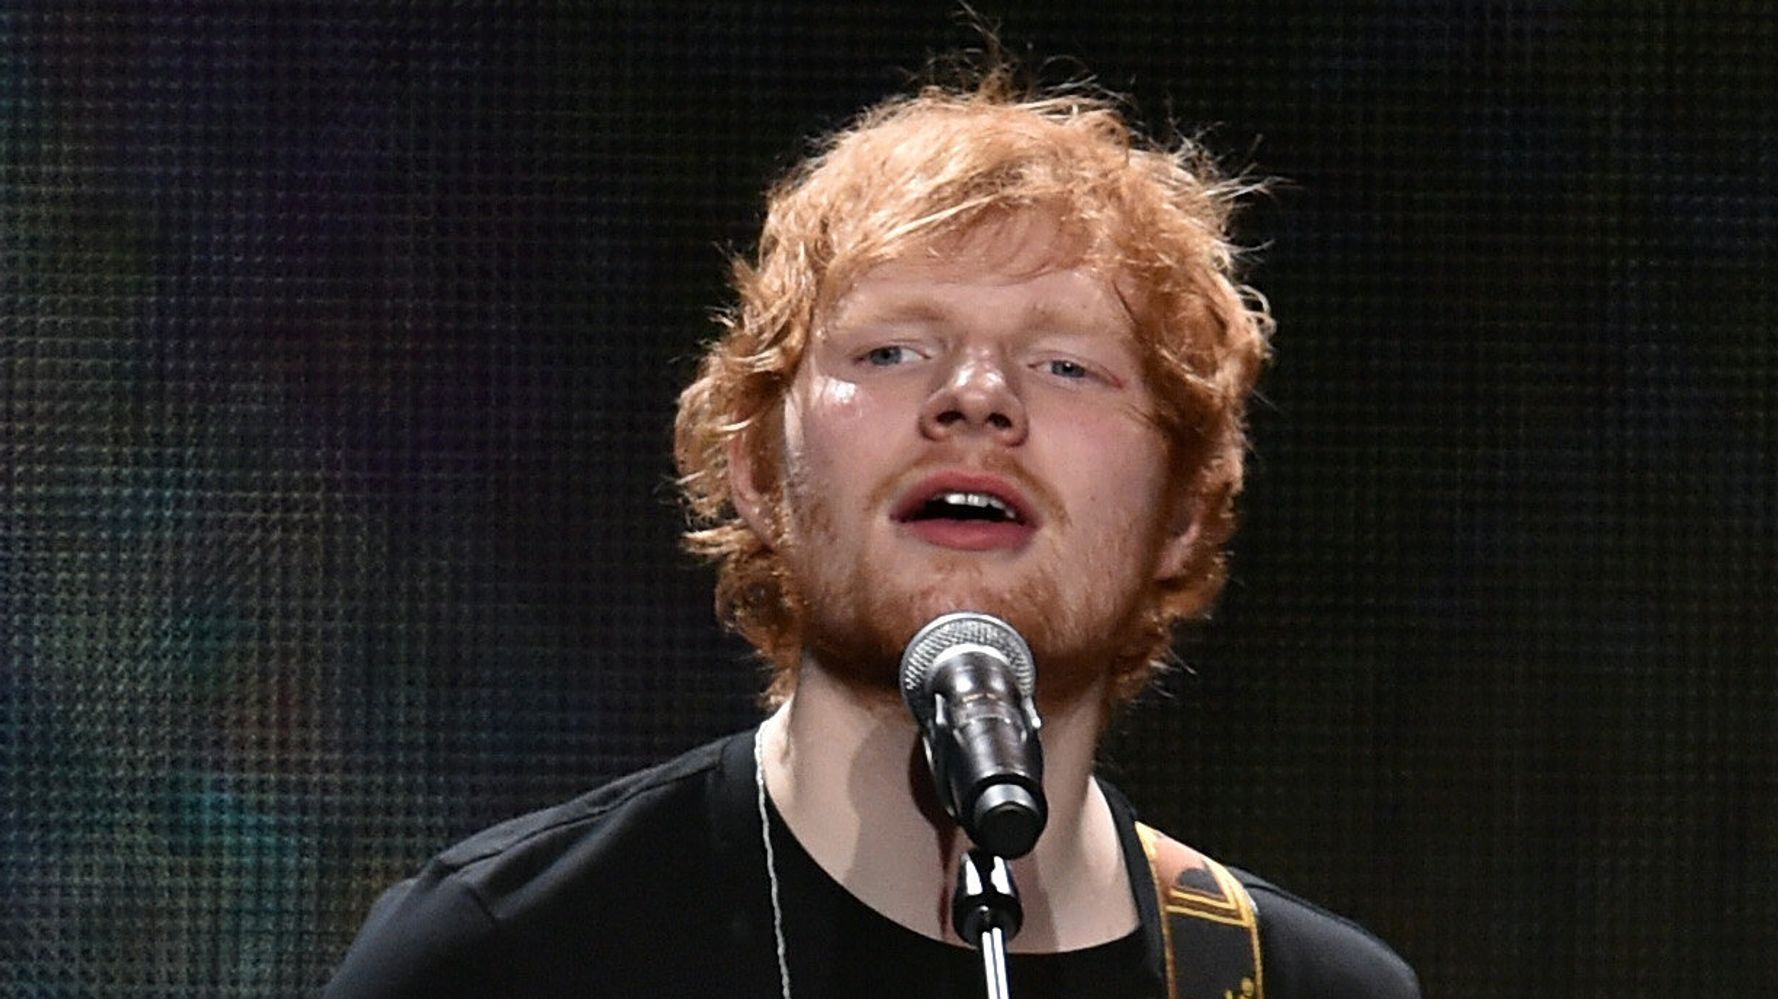 Ed Sheeran Reveals He Nearly Quit Music After His Daughter's Birth